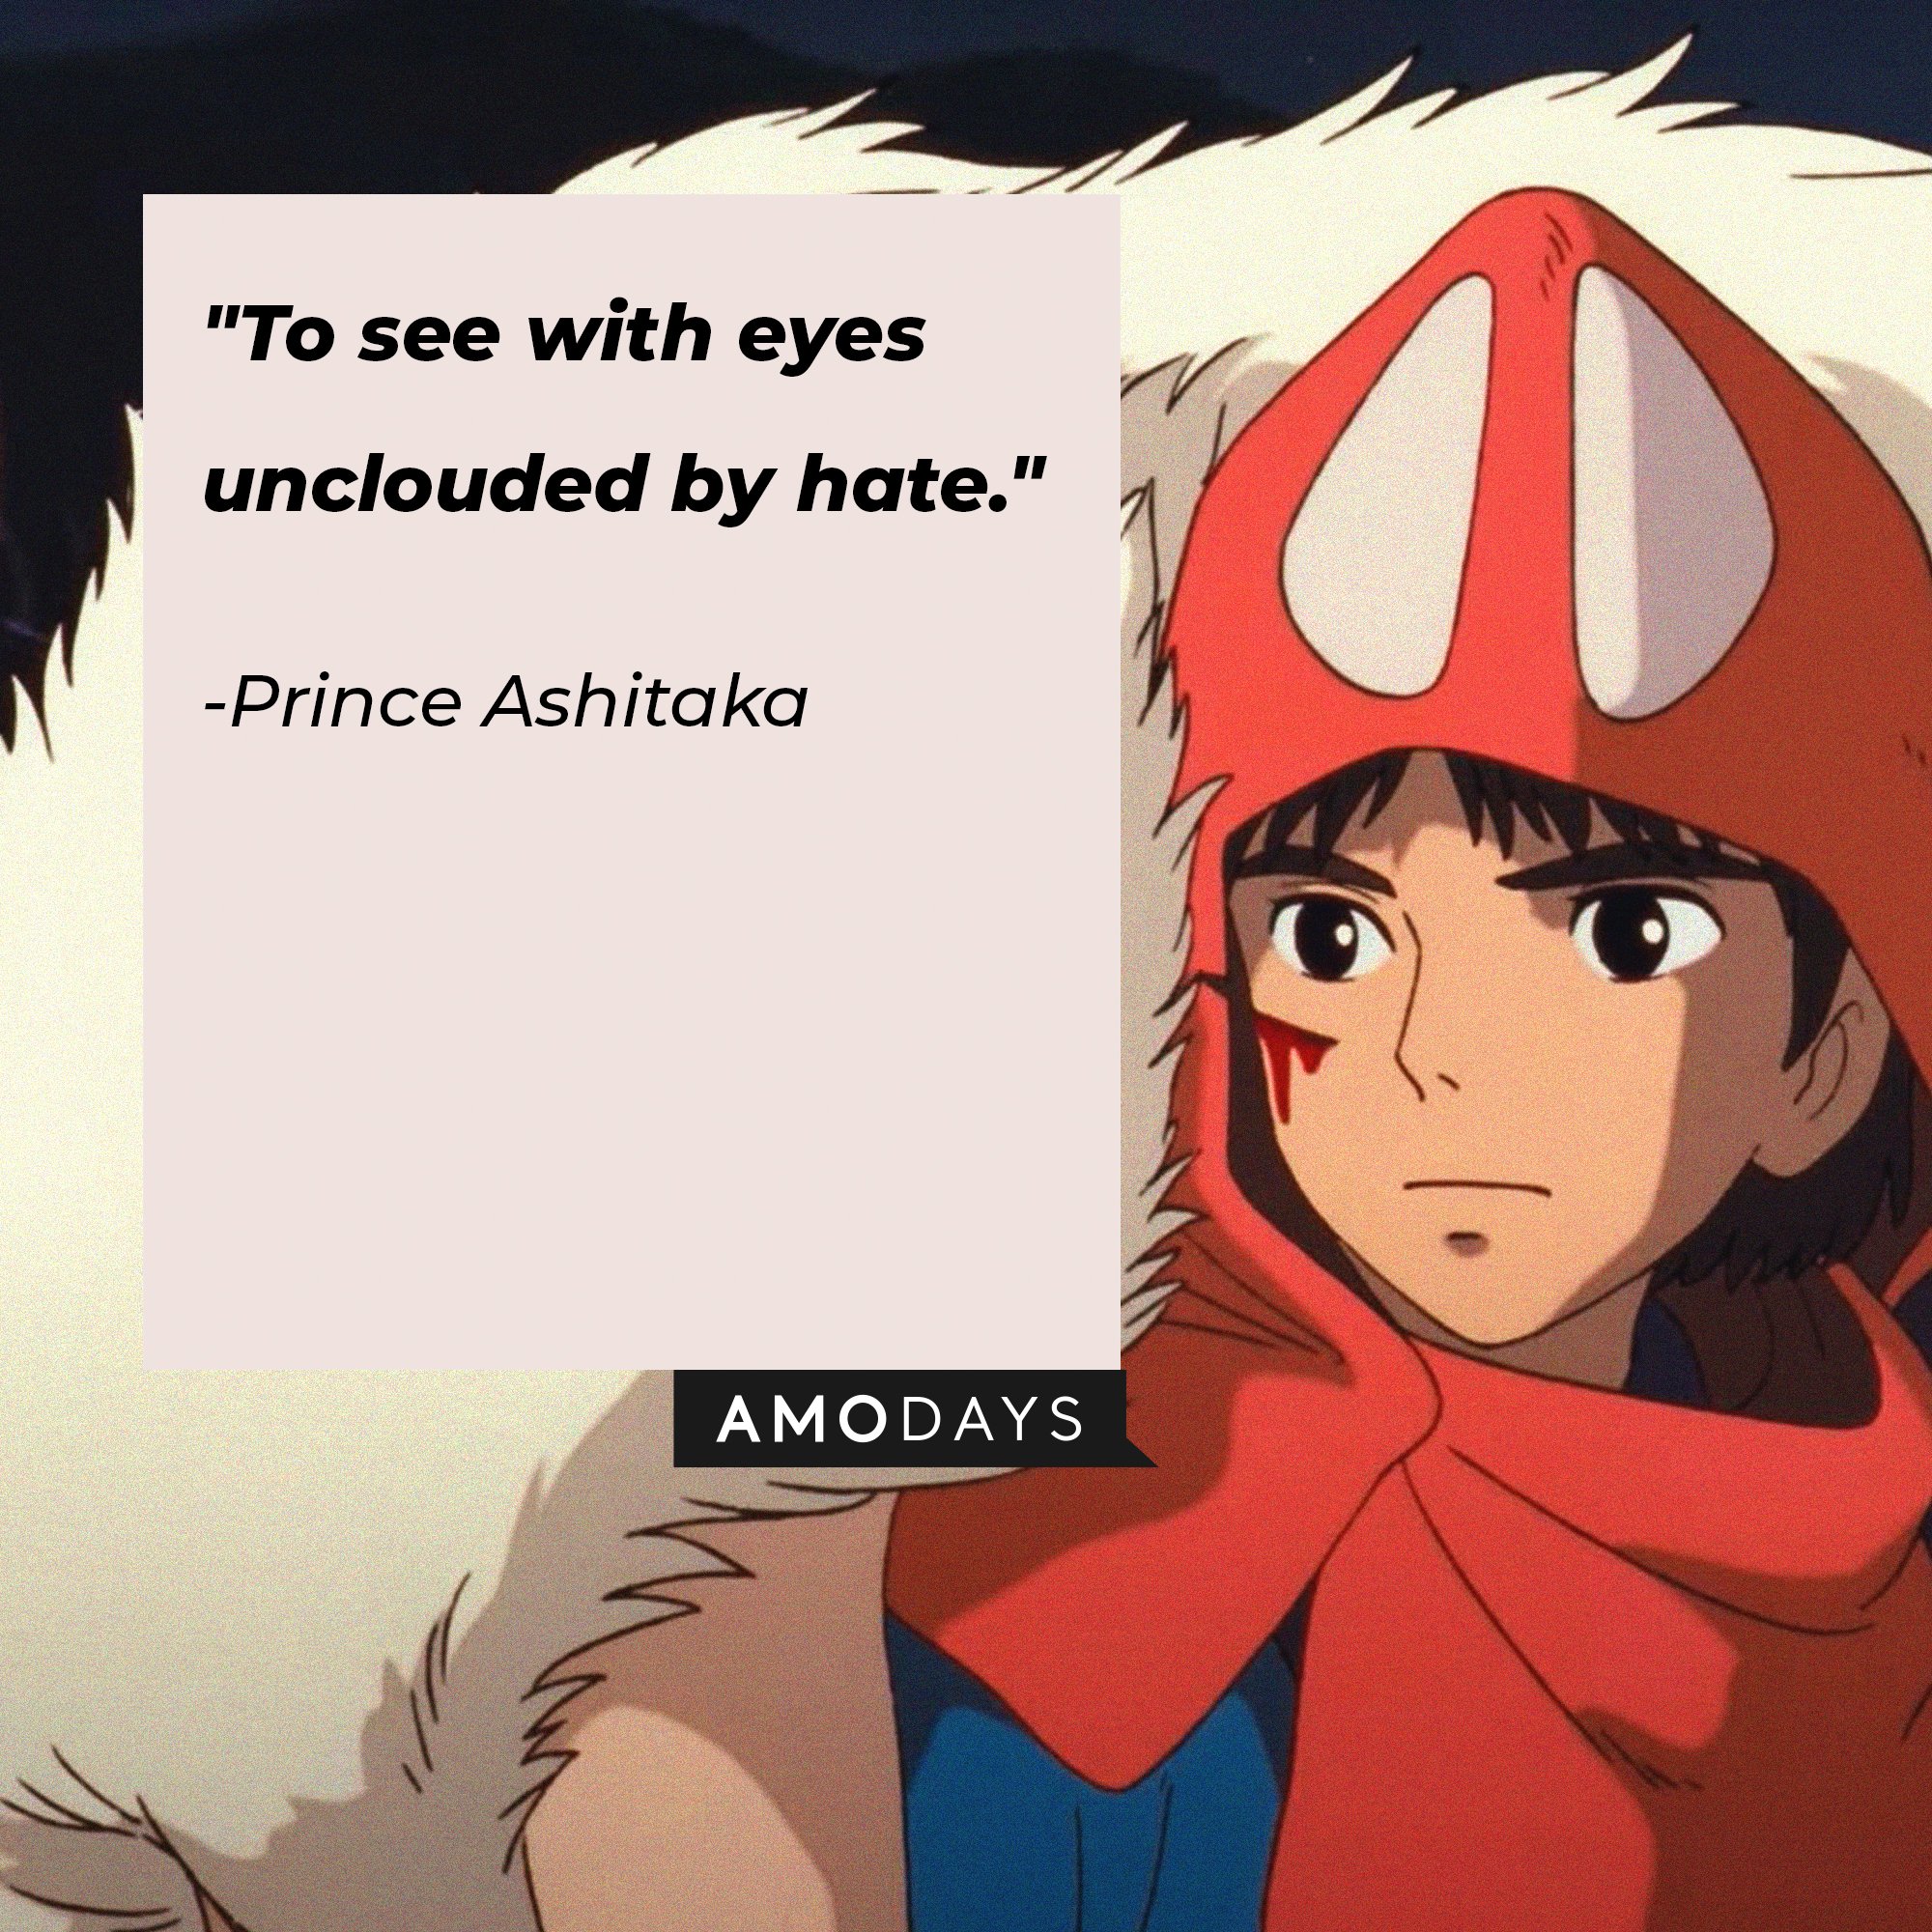  Prince Ashitaka’s quote: "To see with eyes unclouded by hate." | Image: AmoDays